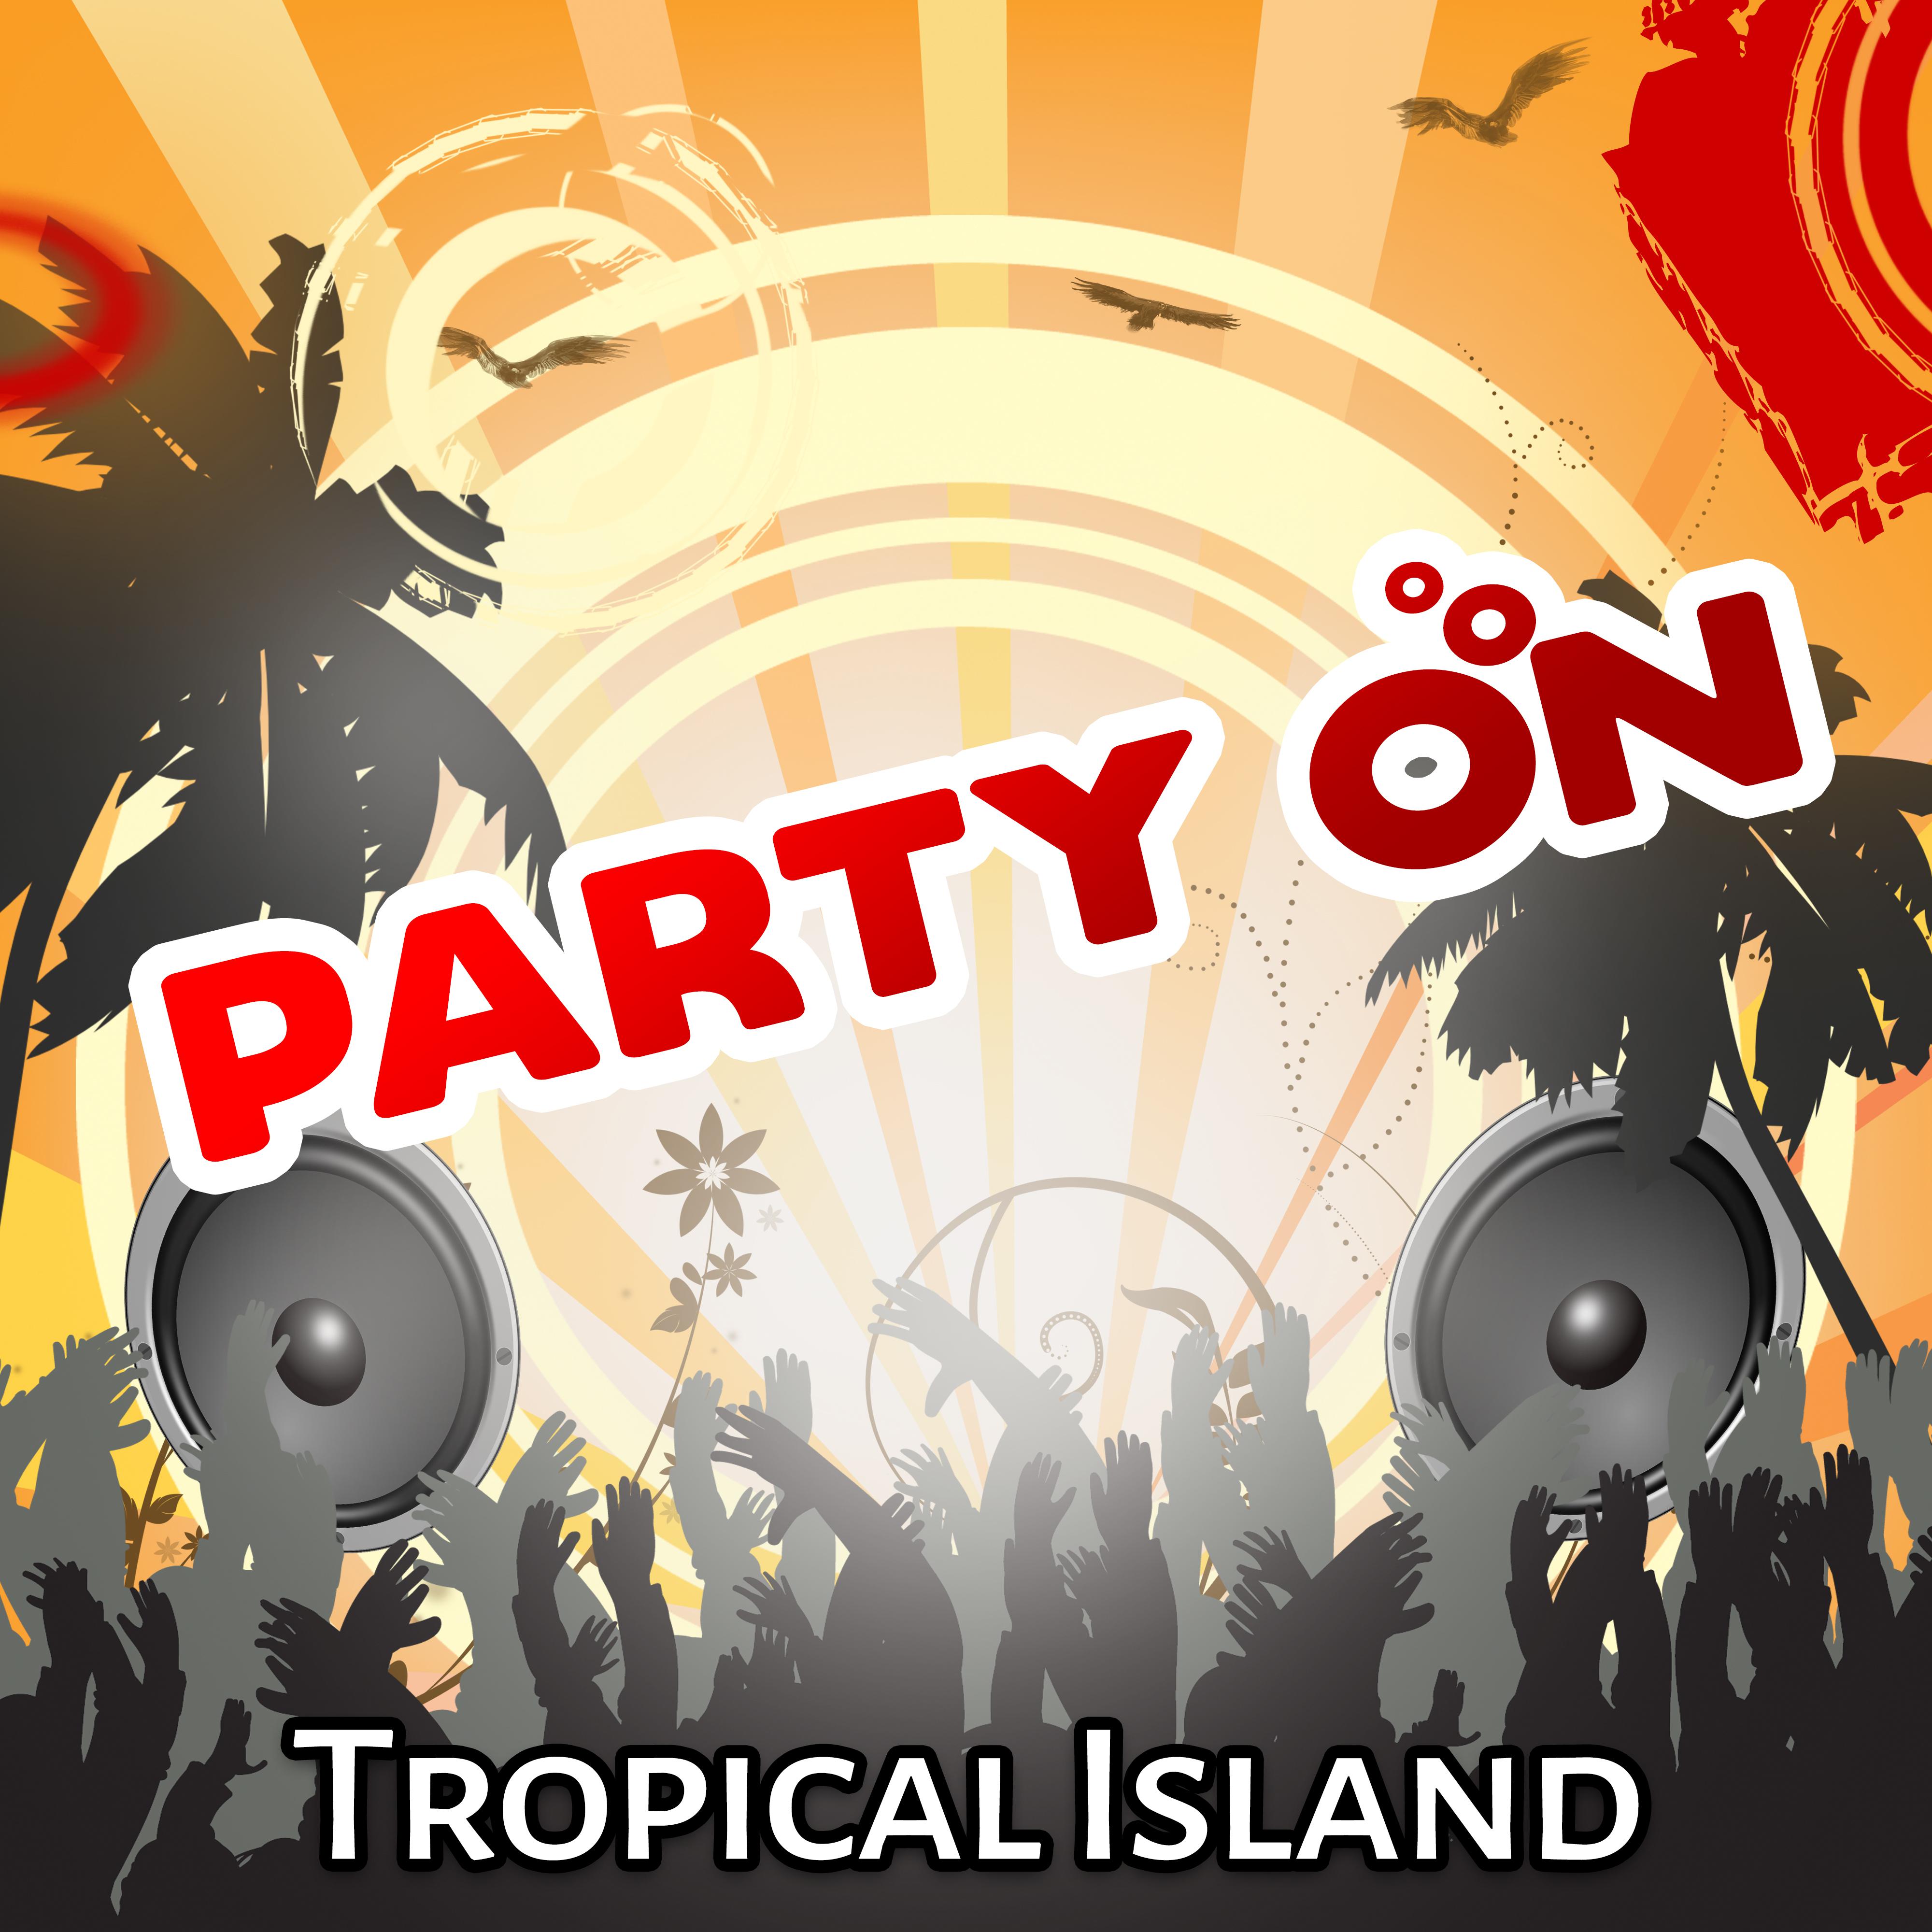 Party on Tropical Island – **** Vibes, Dance All Night, Chill Out Party Time